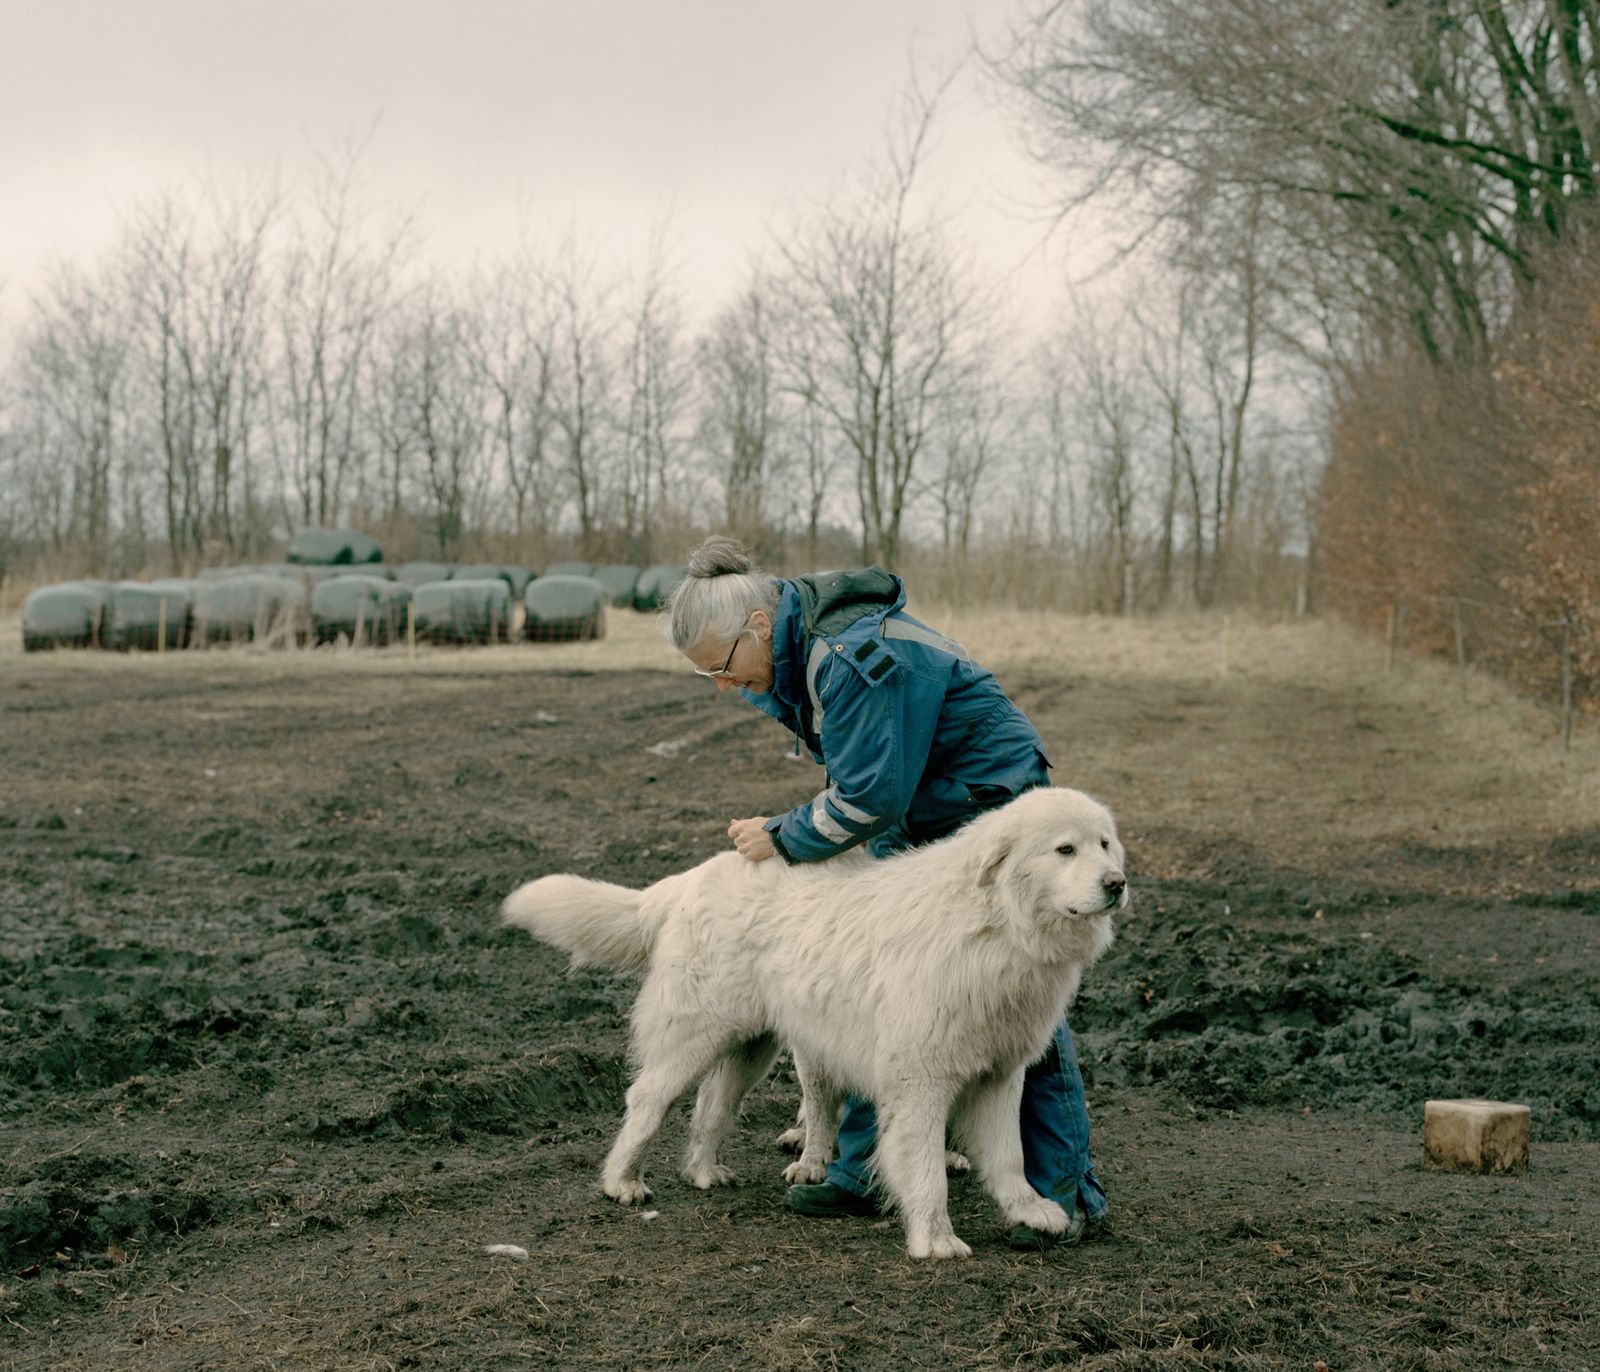 © Tobias Nicolai - Image from the Wolf land photography project